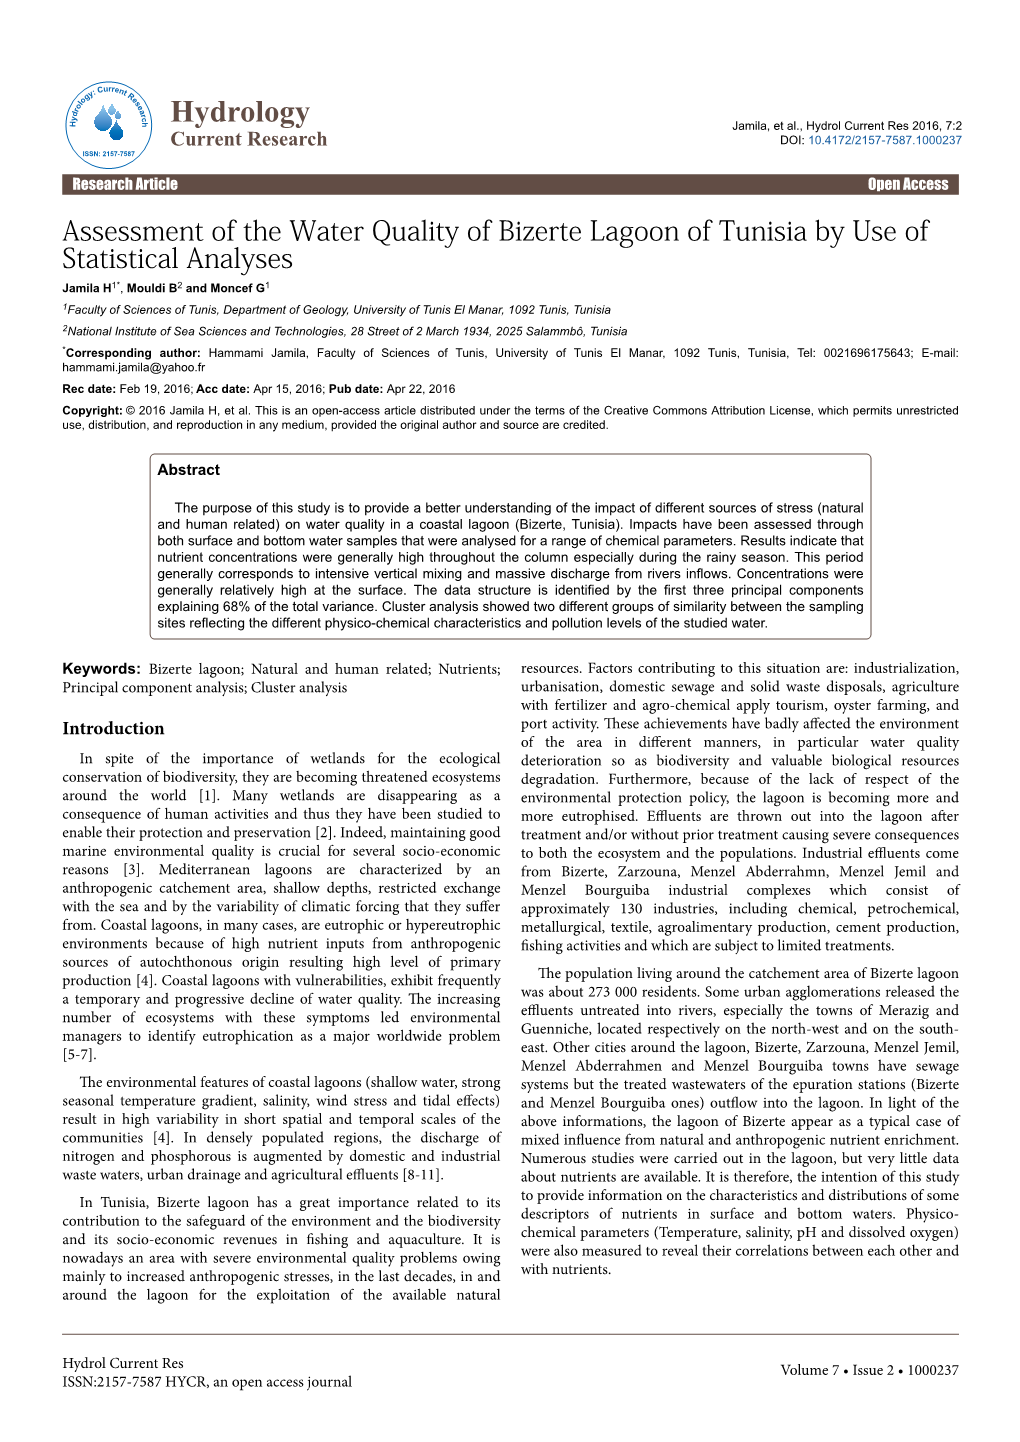 Assessment of the Water Quality of Bizerte Lagoon of Tunisia by Use Of